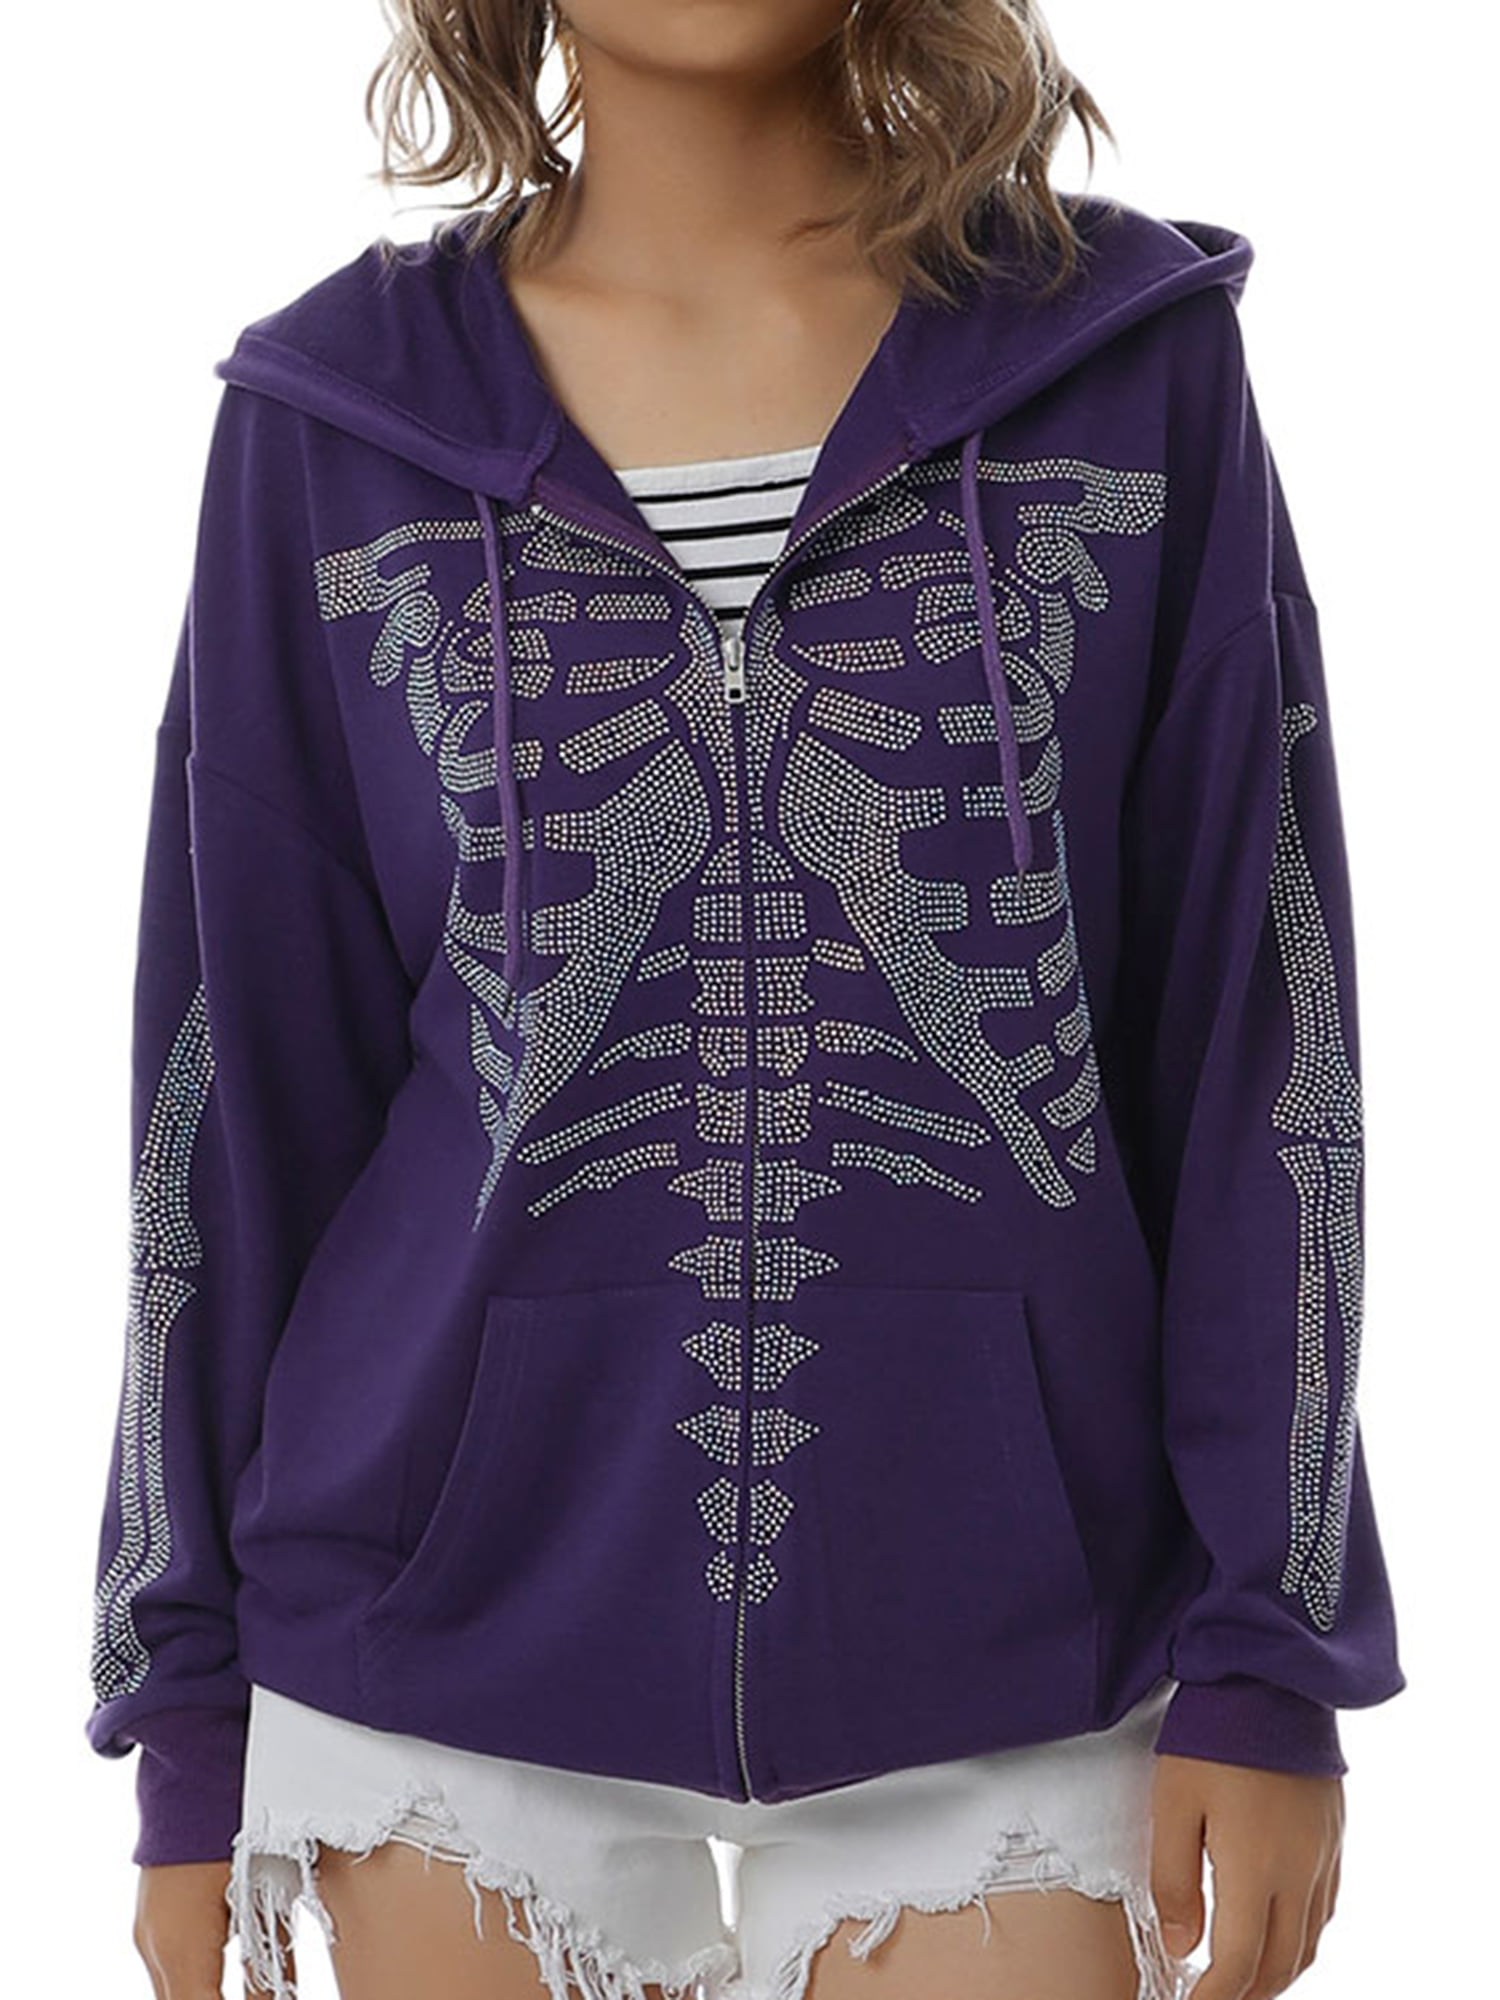 Womens Gildan Full Zip Up Hoodie W Gothic Style Wings Design FREE SHIPPING 